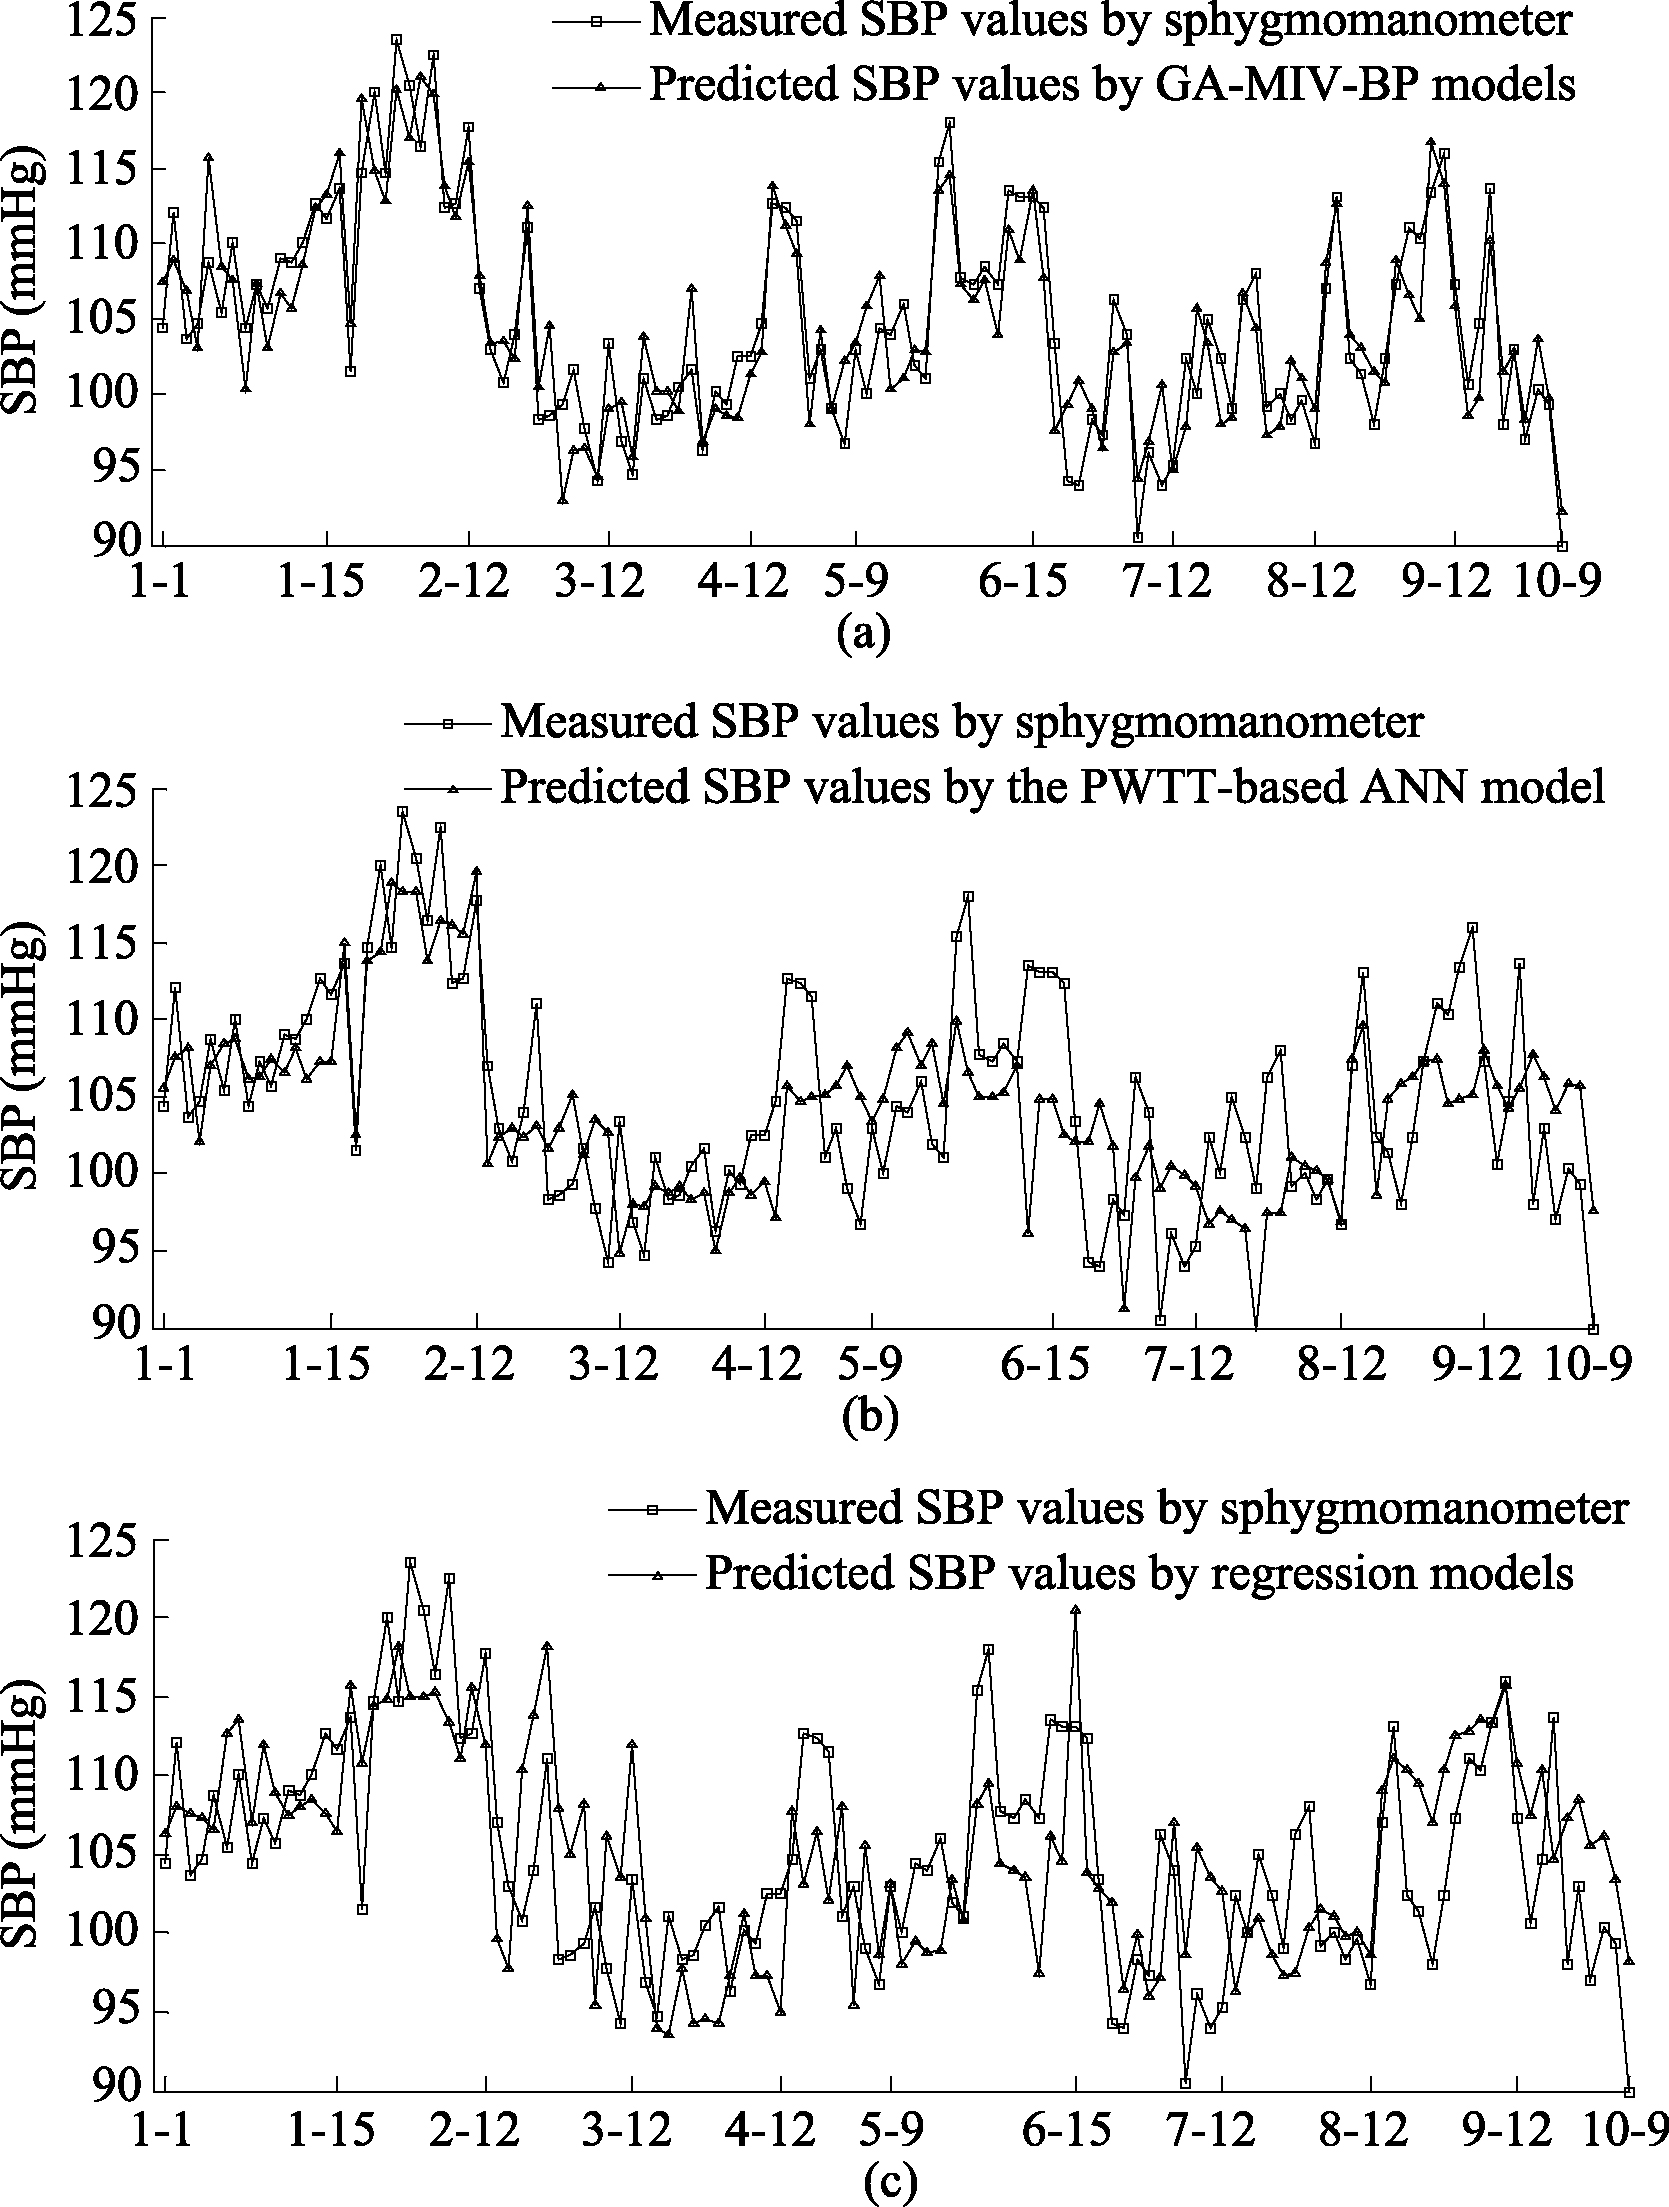 Comparison of predicted and measured values of SBP.